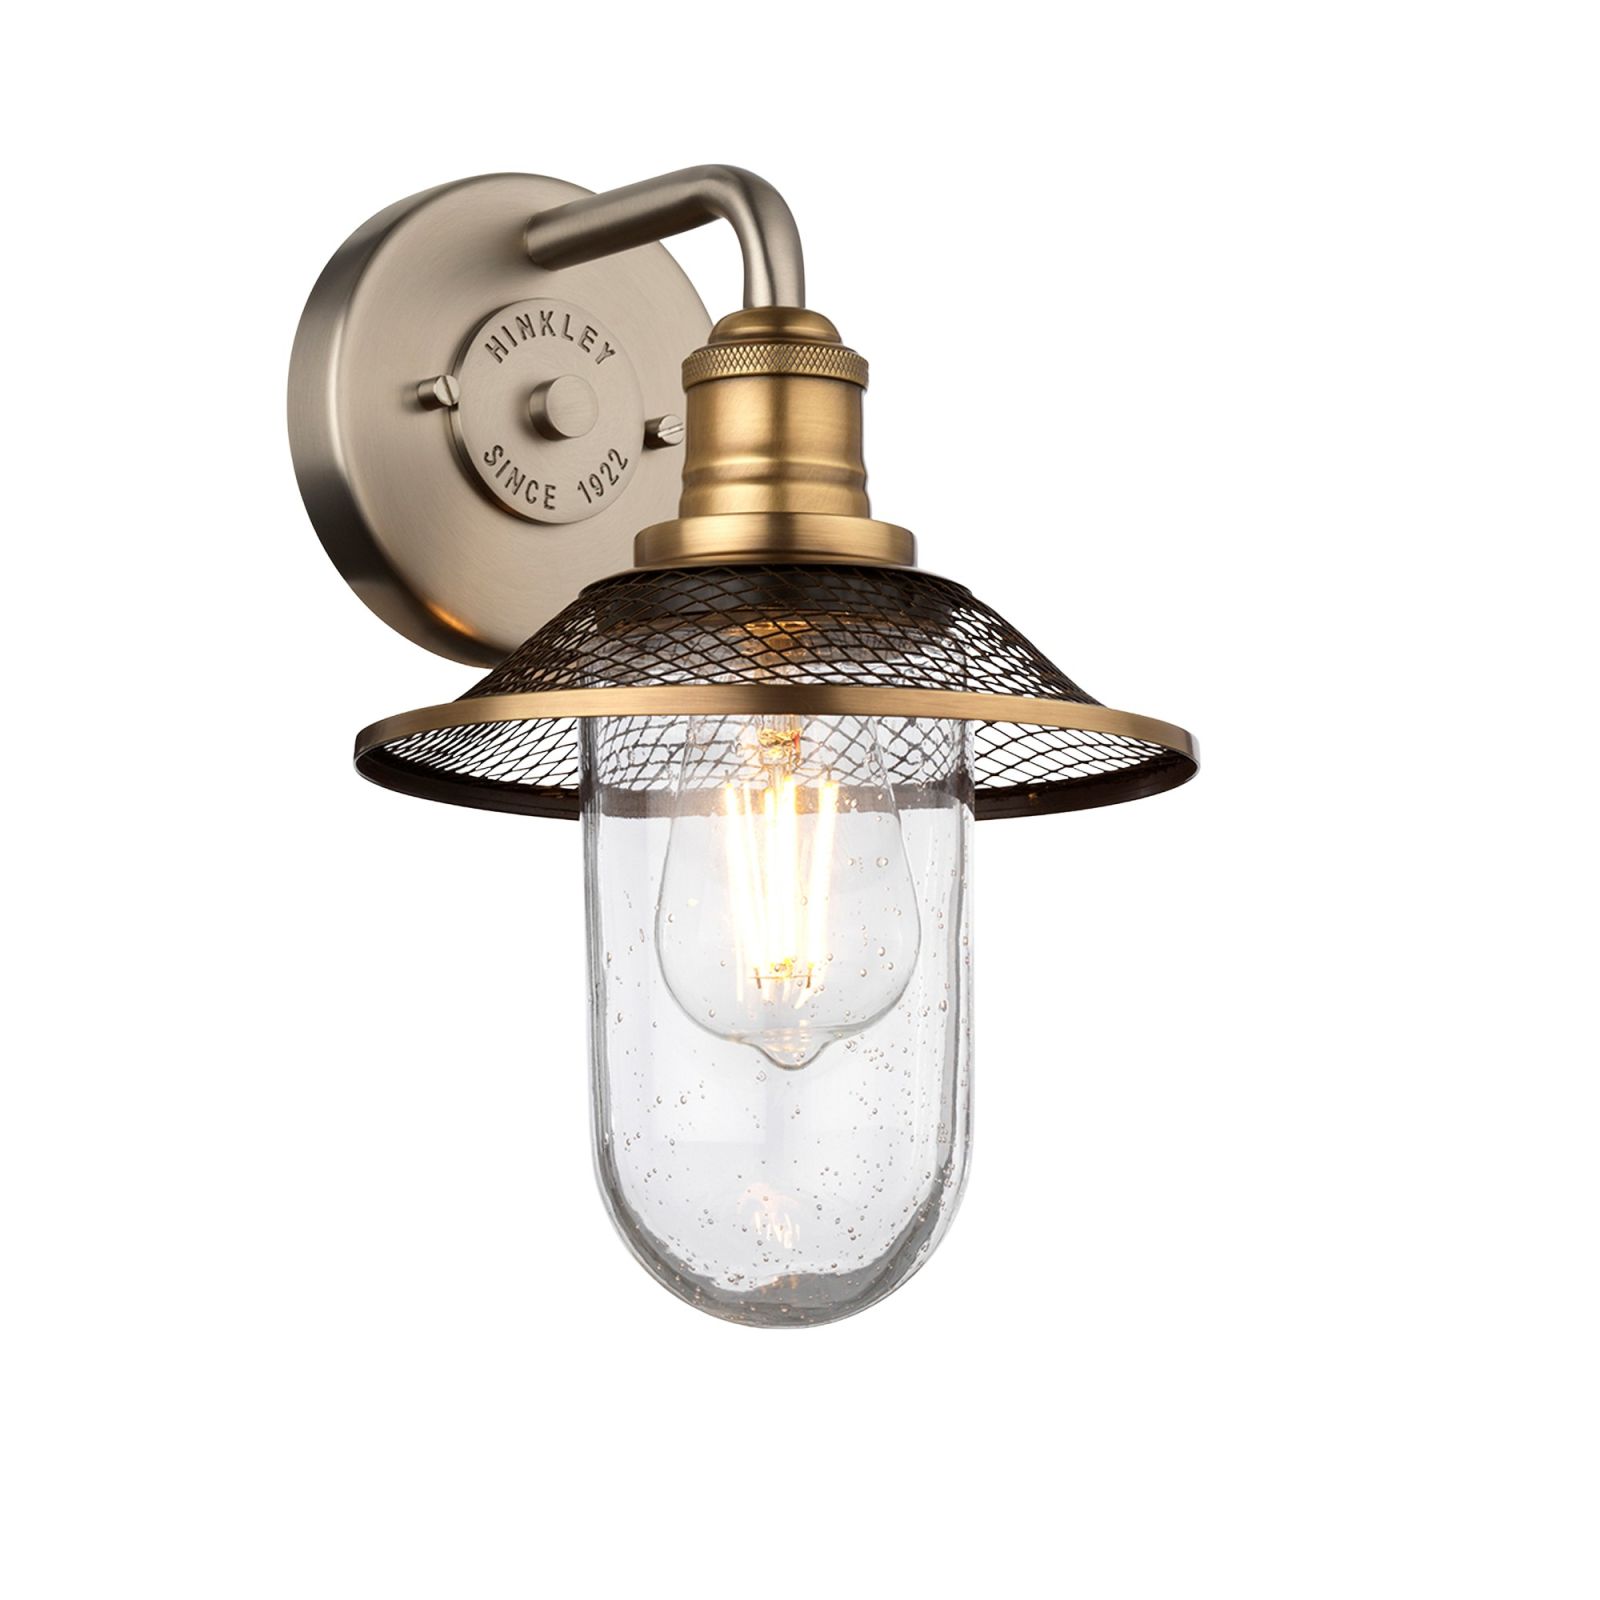 Rigby Single Bathroom Wall Light in Antique Nickel and Heritage Brass